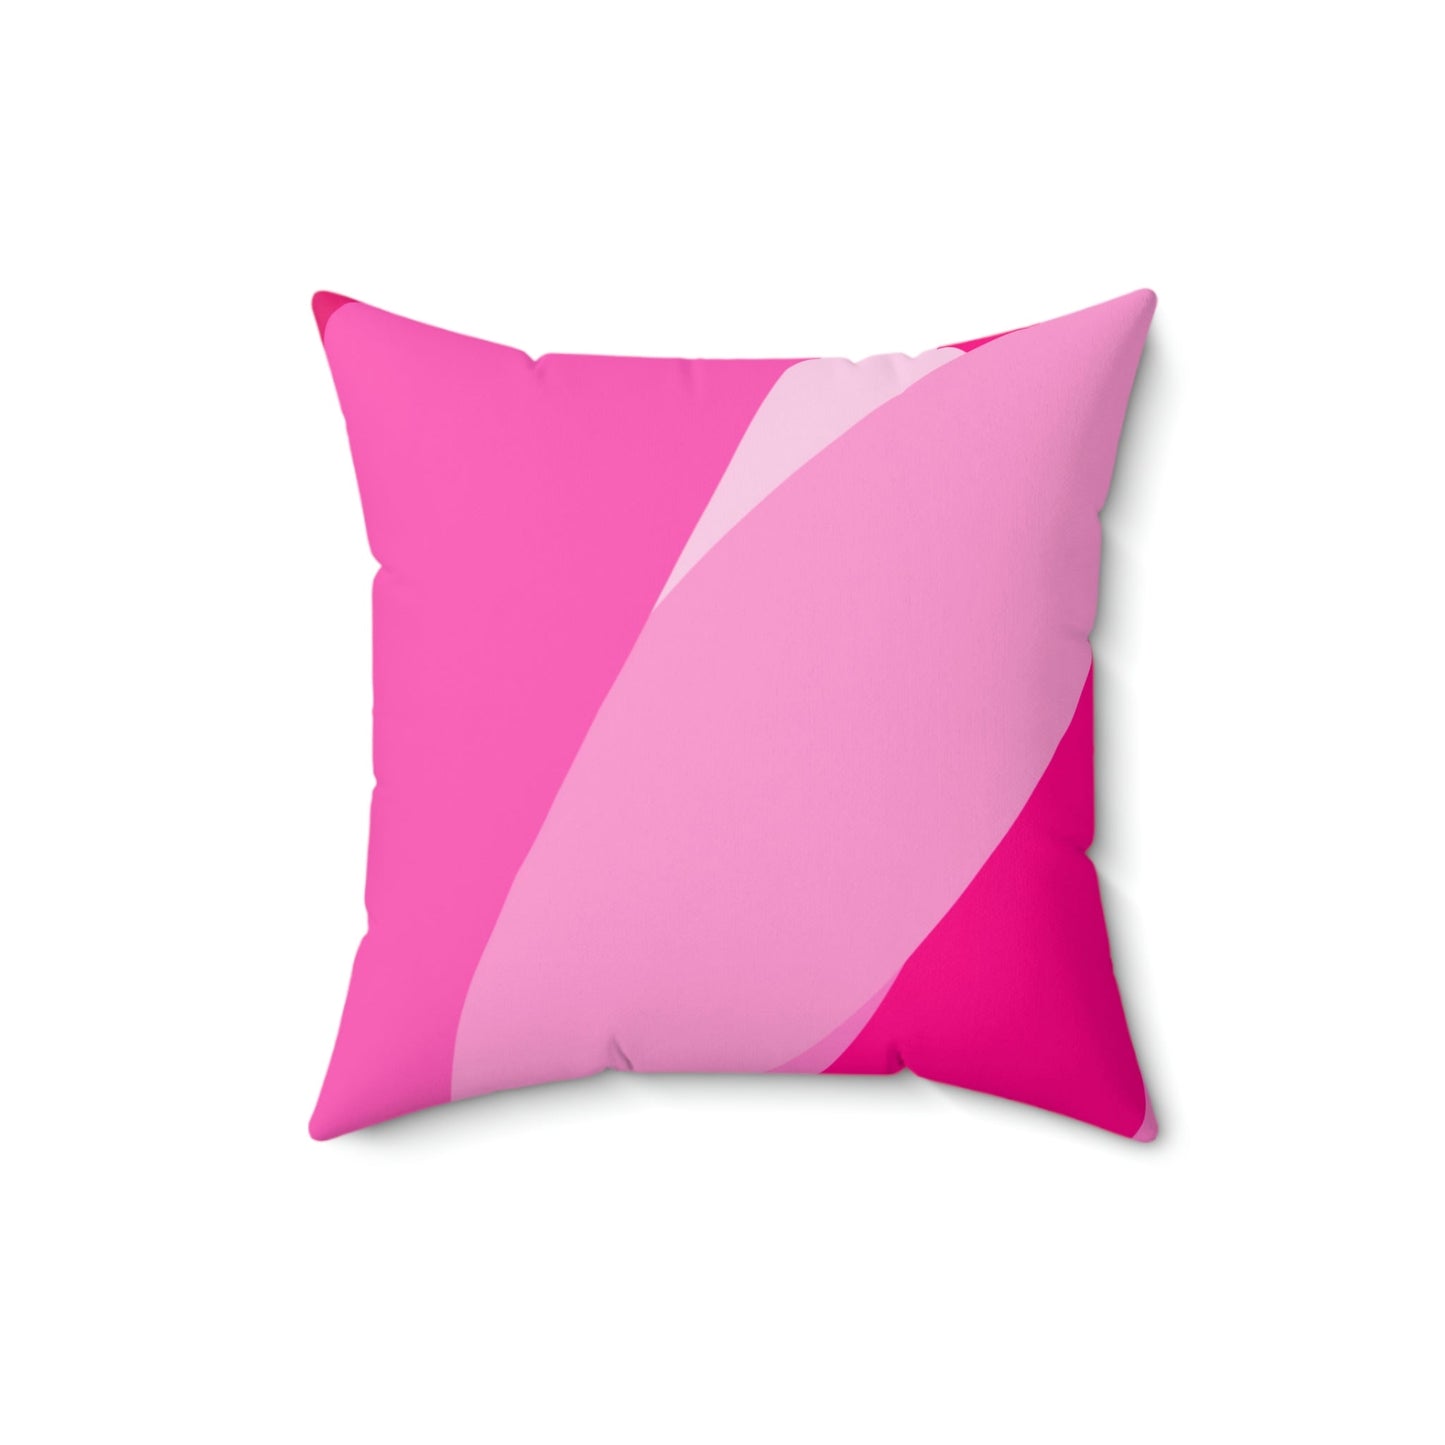 All Shades of Pink Ribbon Square Pillow Home Decor Pink Sweetheart